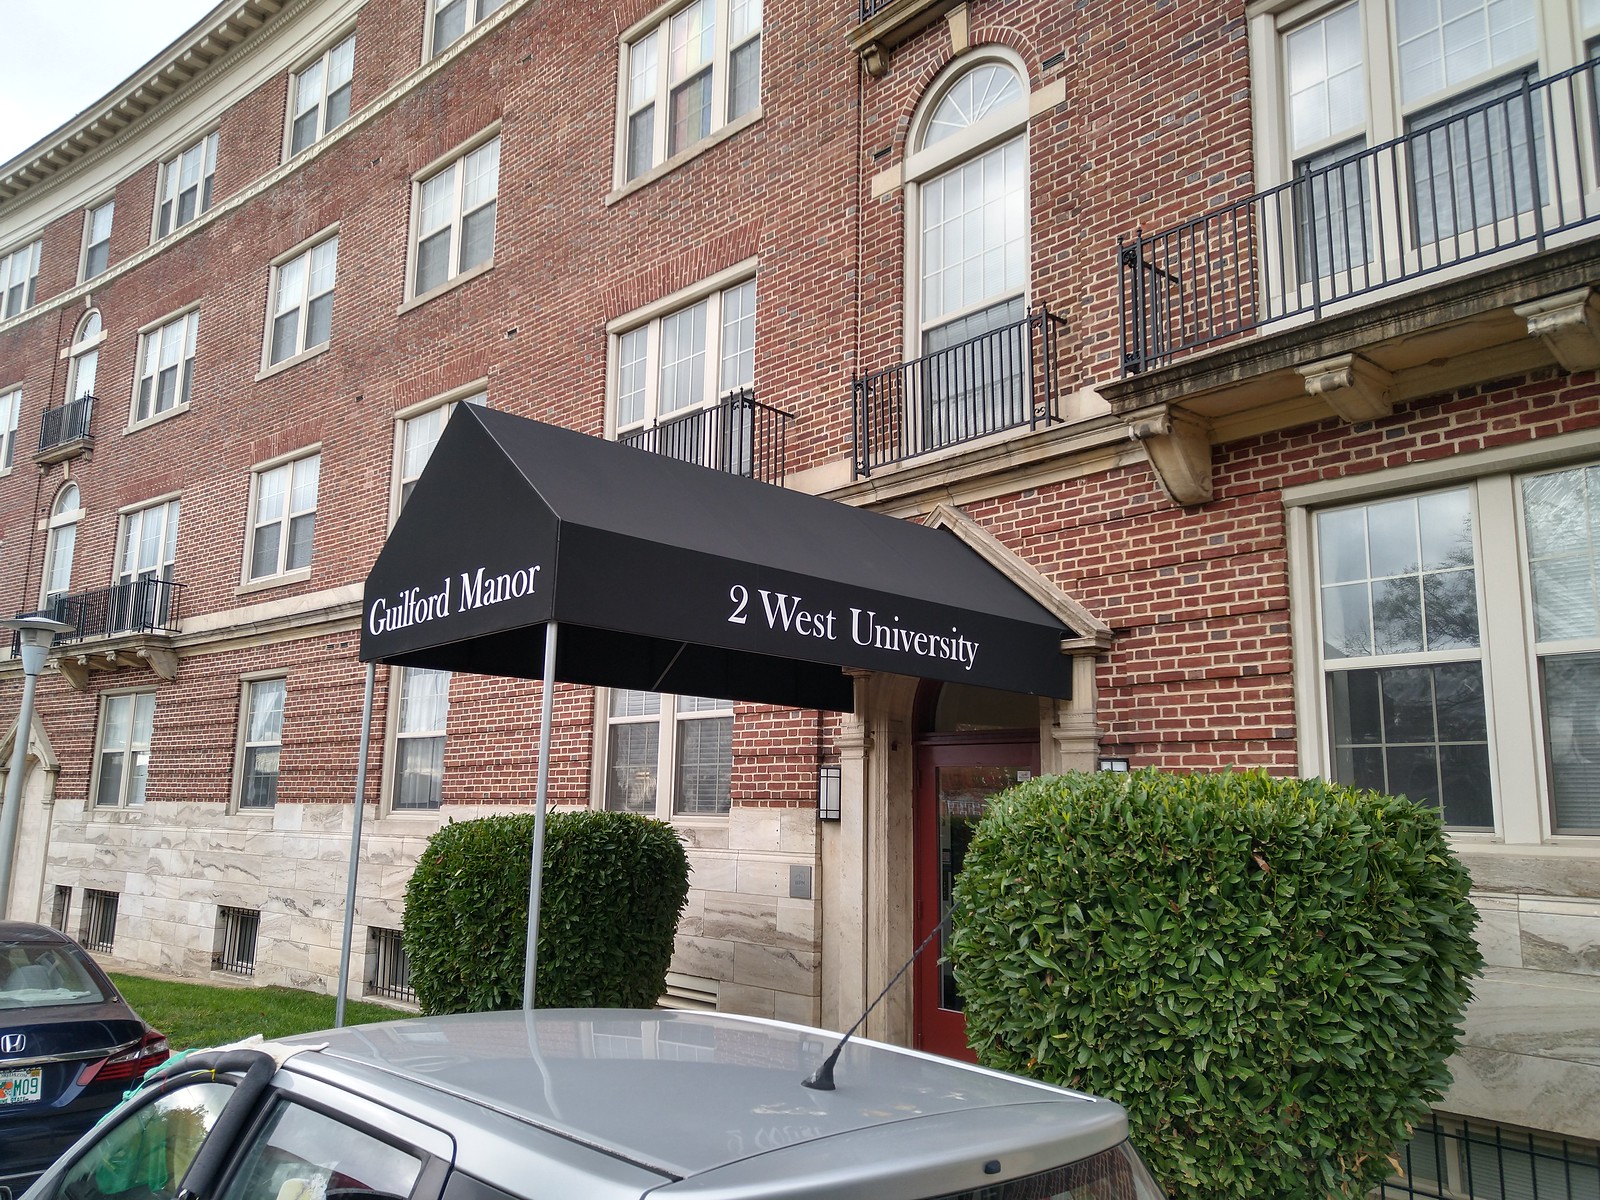 Commercial-Entrance-Hoffman Awning